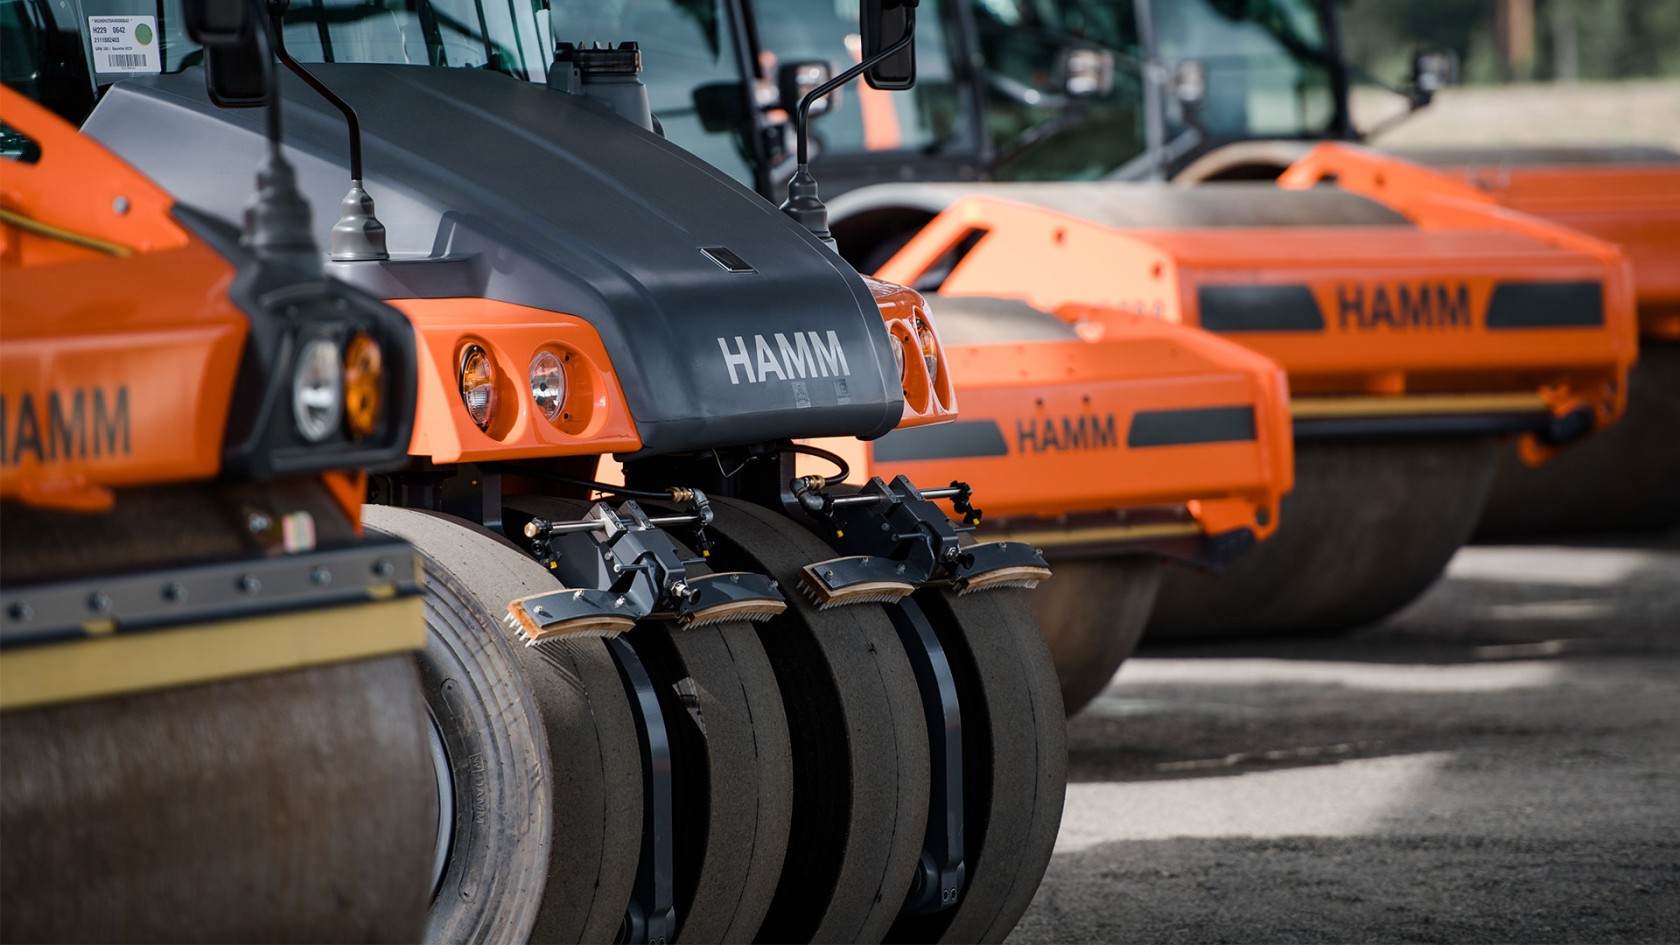 The Hamm AG is a company of the WIRTGEN GROUP. Manufacturer of single drum rollers, soil compactors and tandem rollers for earthmoving, soil, asphalt and road construction.